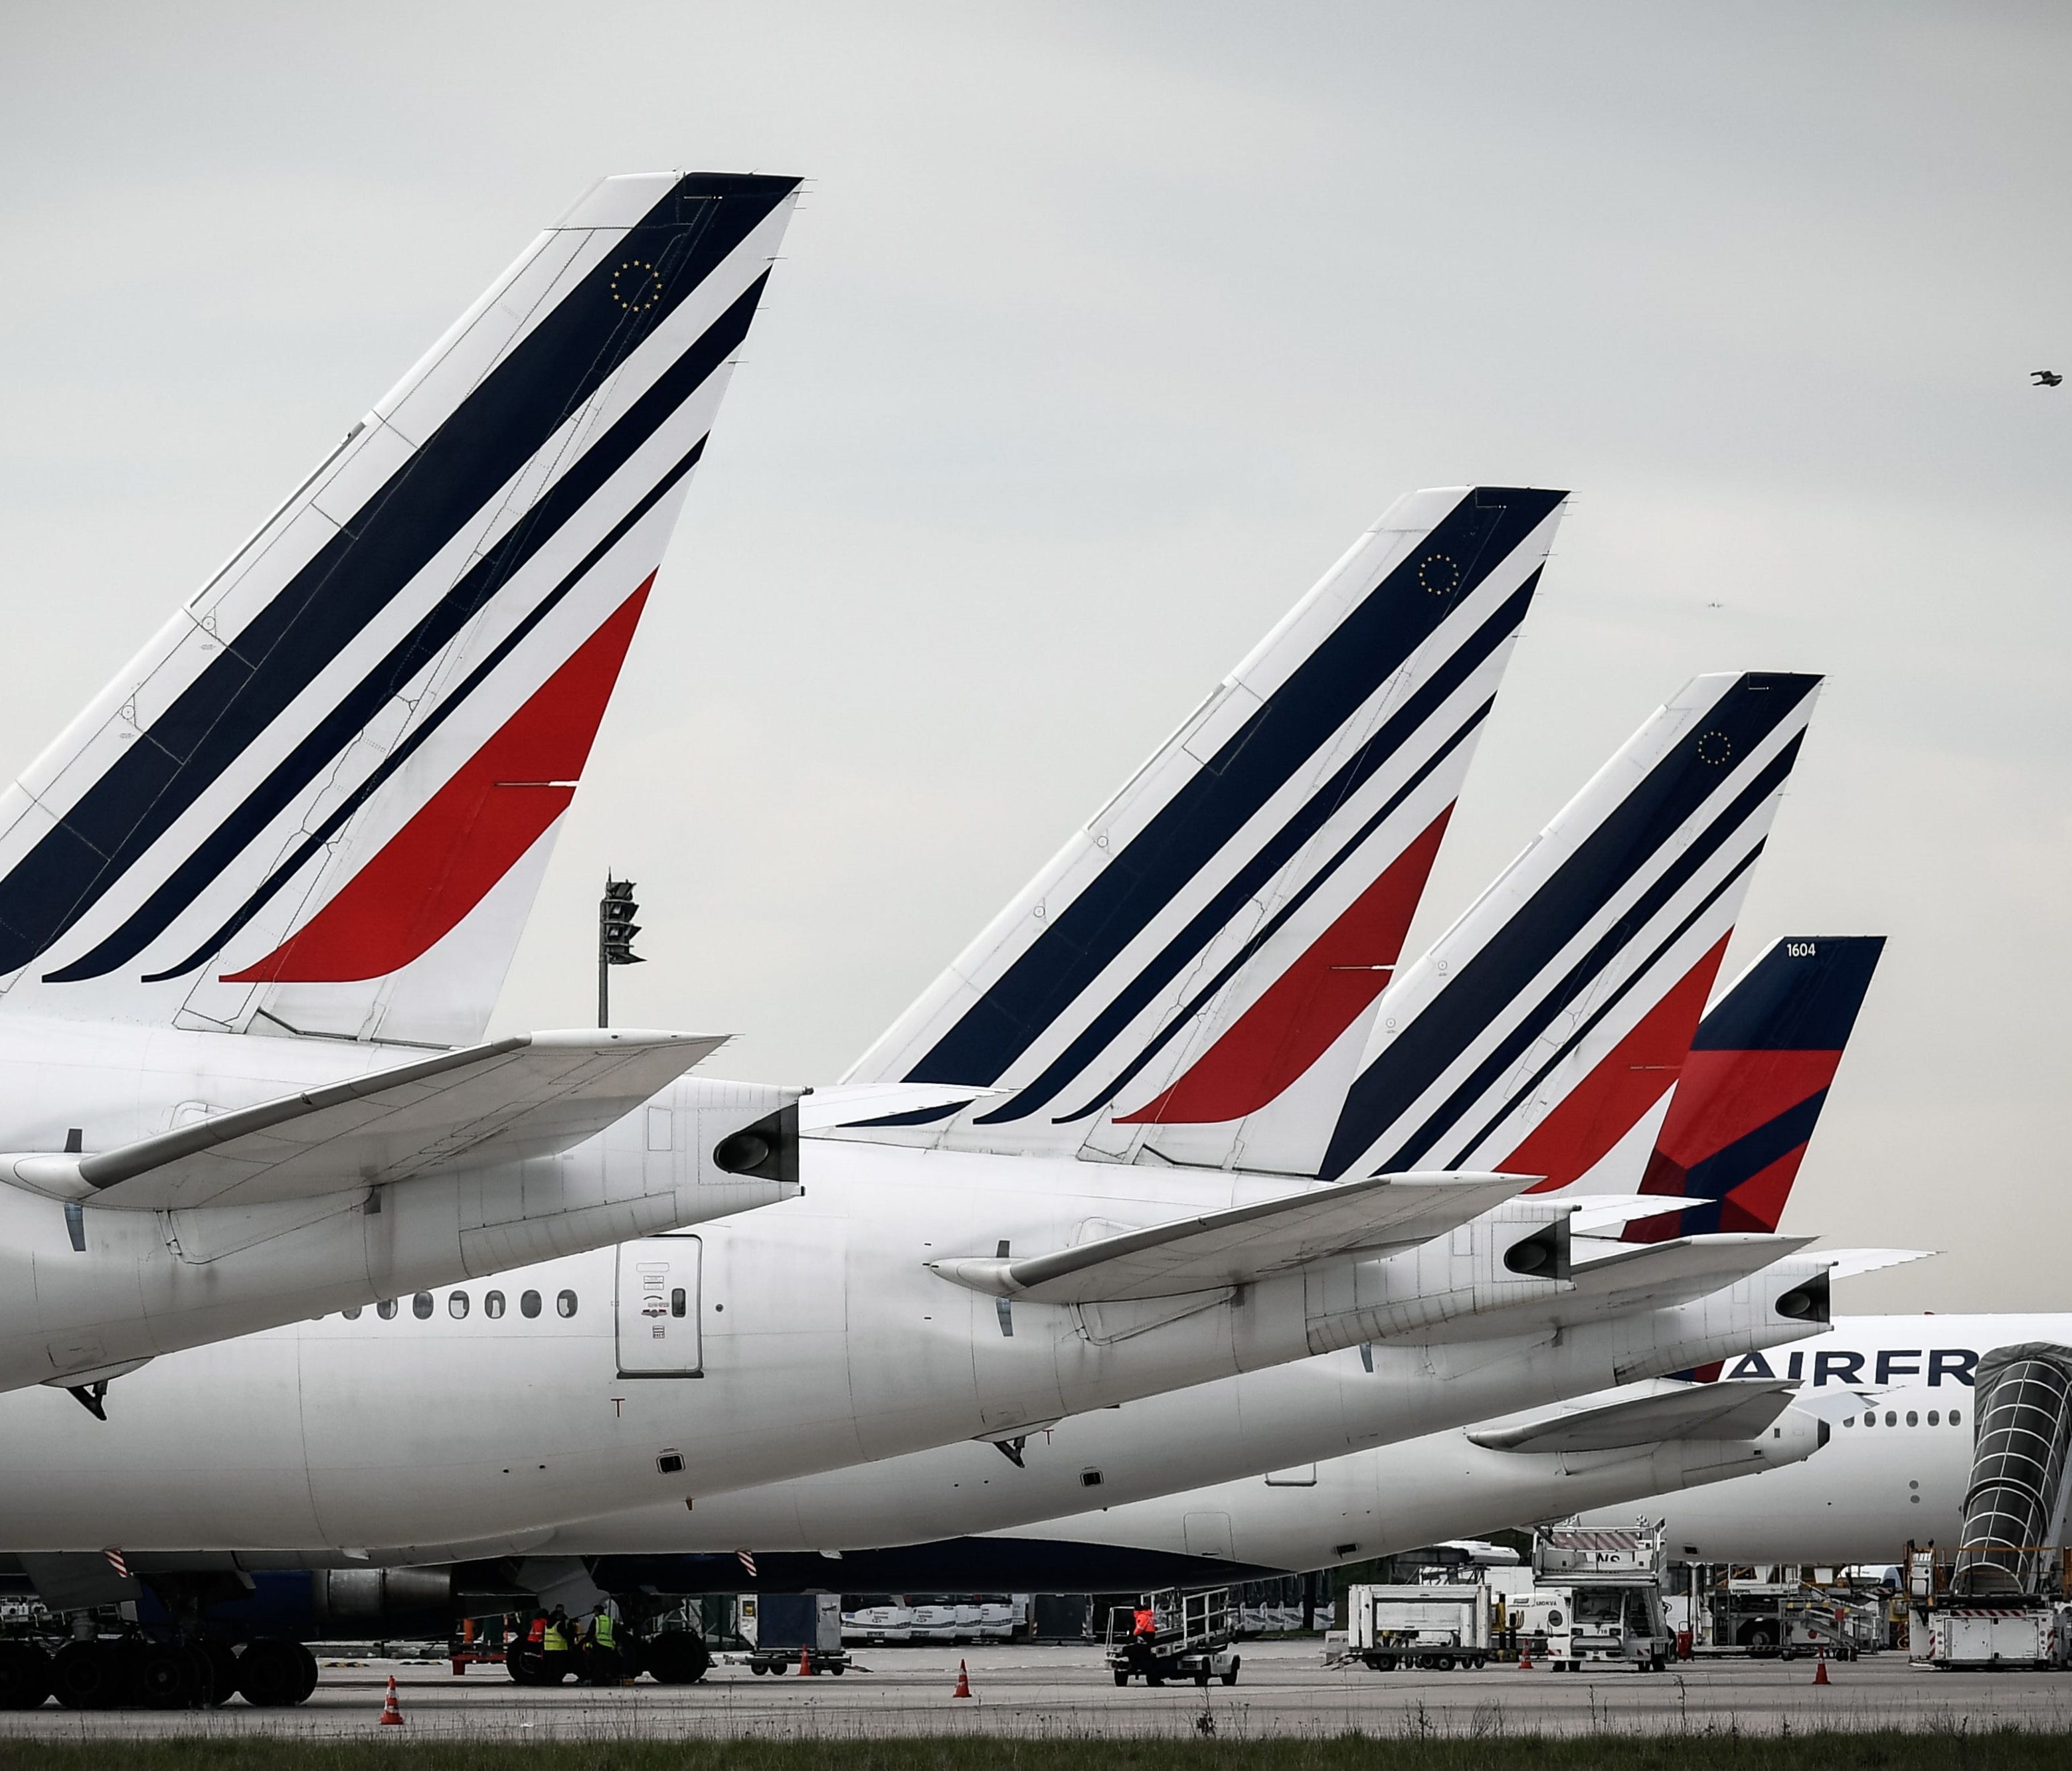 This file photo taken on April 11, 2018, shows Air France planes at Paris Charles de Gaulle Airport; one aircraft of partner Delta can be seen among them.